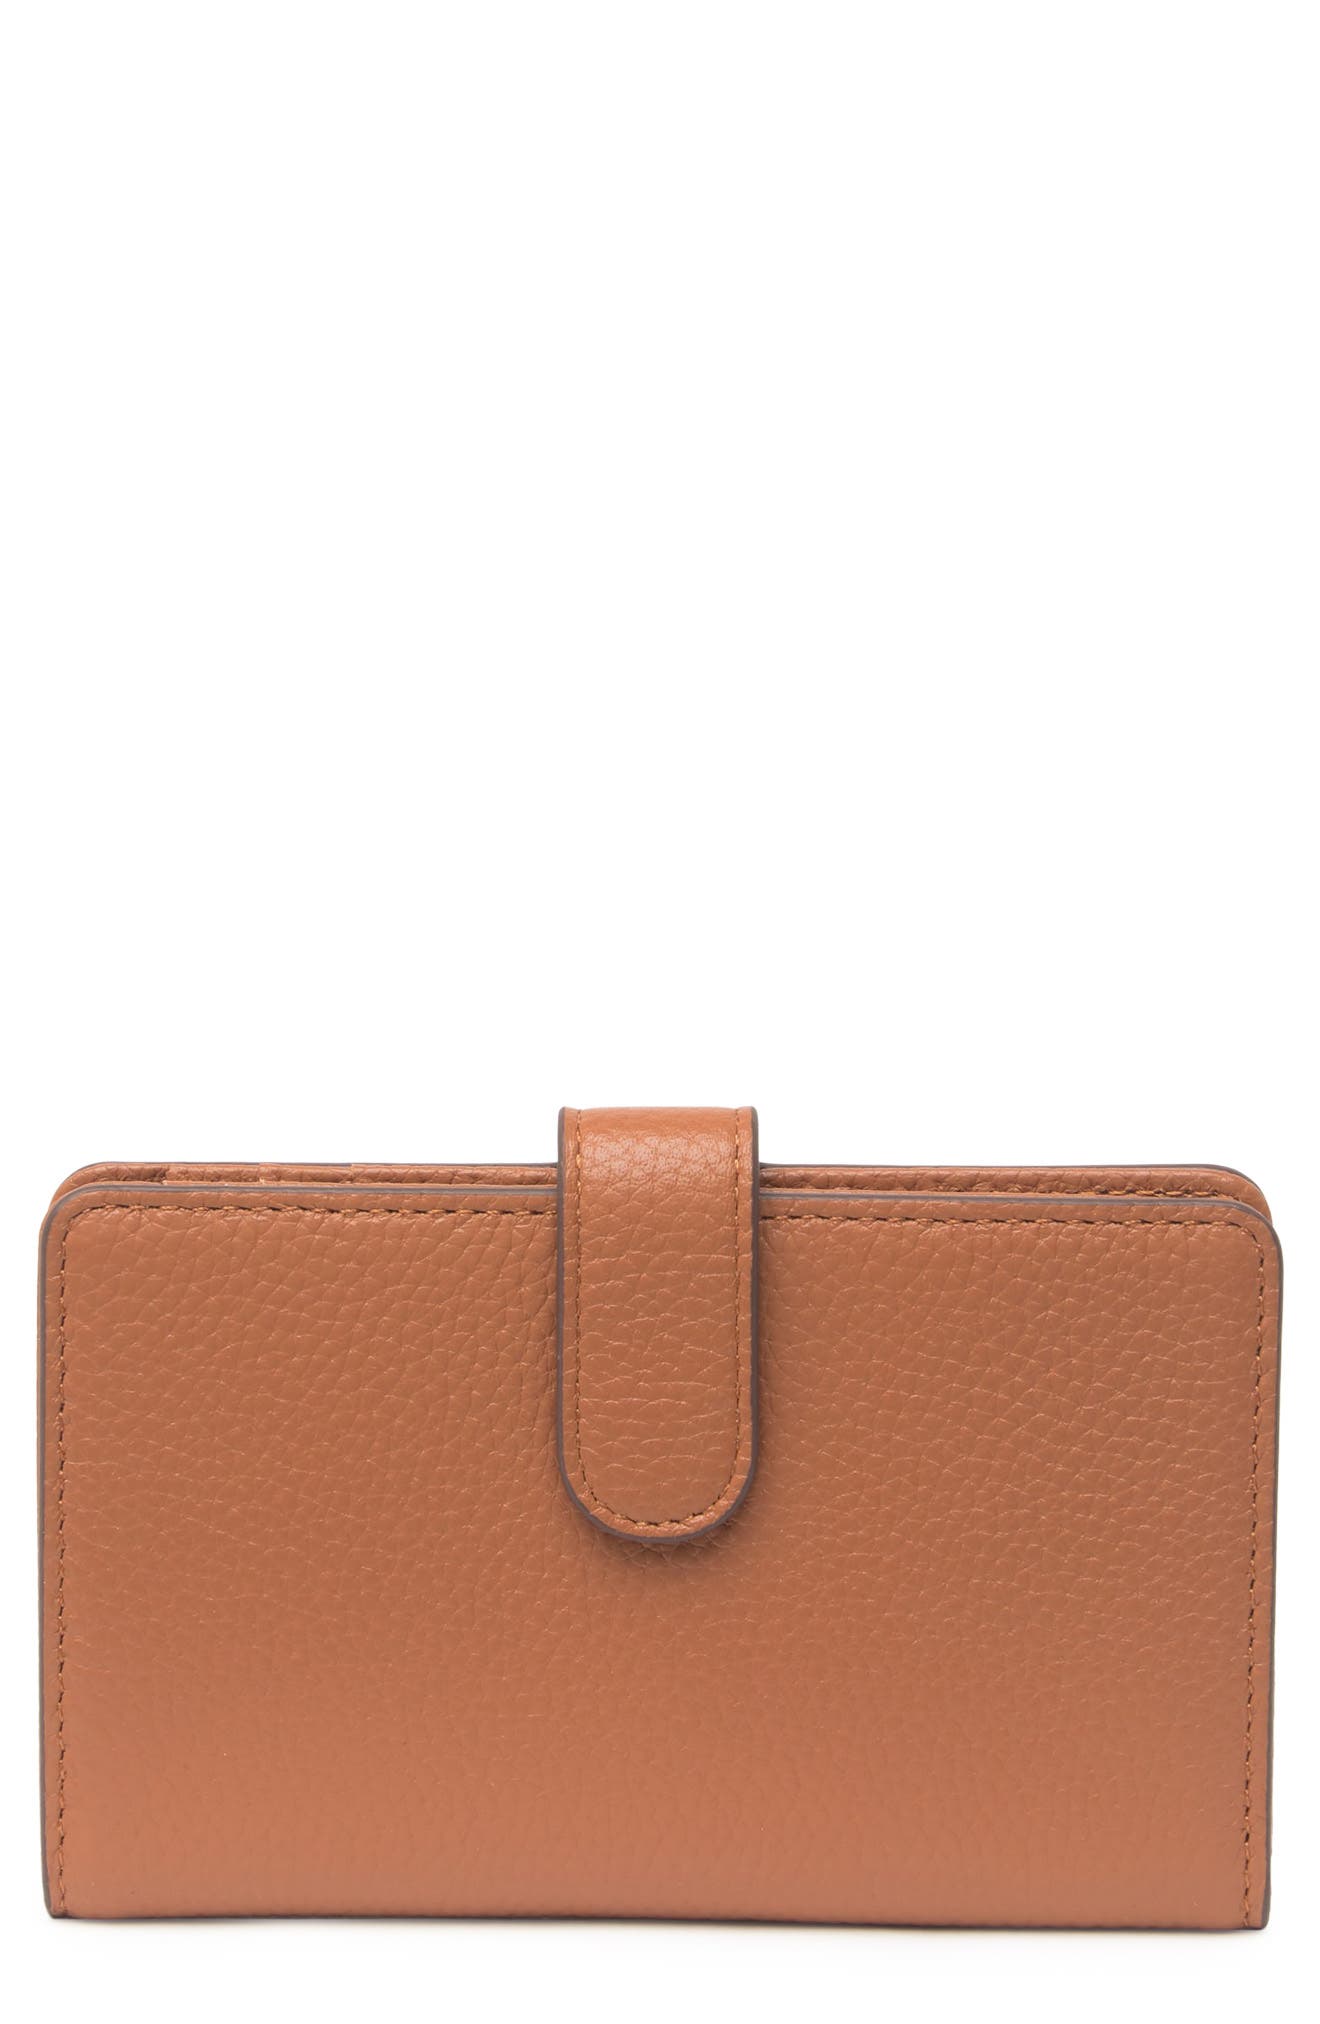 Nordstrom Kelly Leather Card Case In Tan Pecan